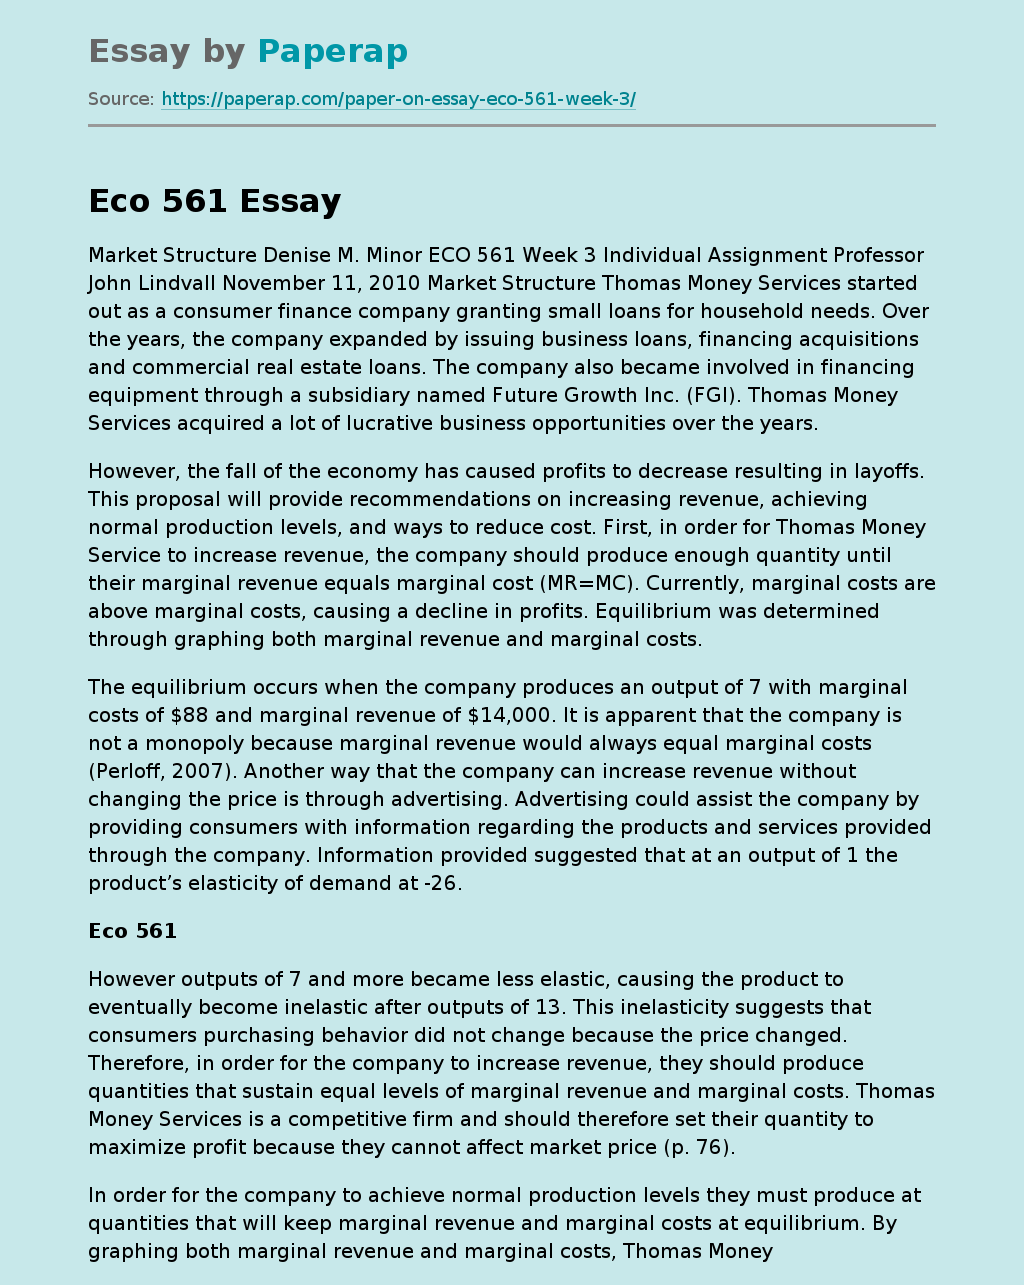 Eco 561 and Market Structure